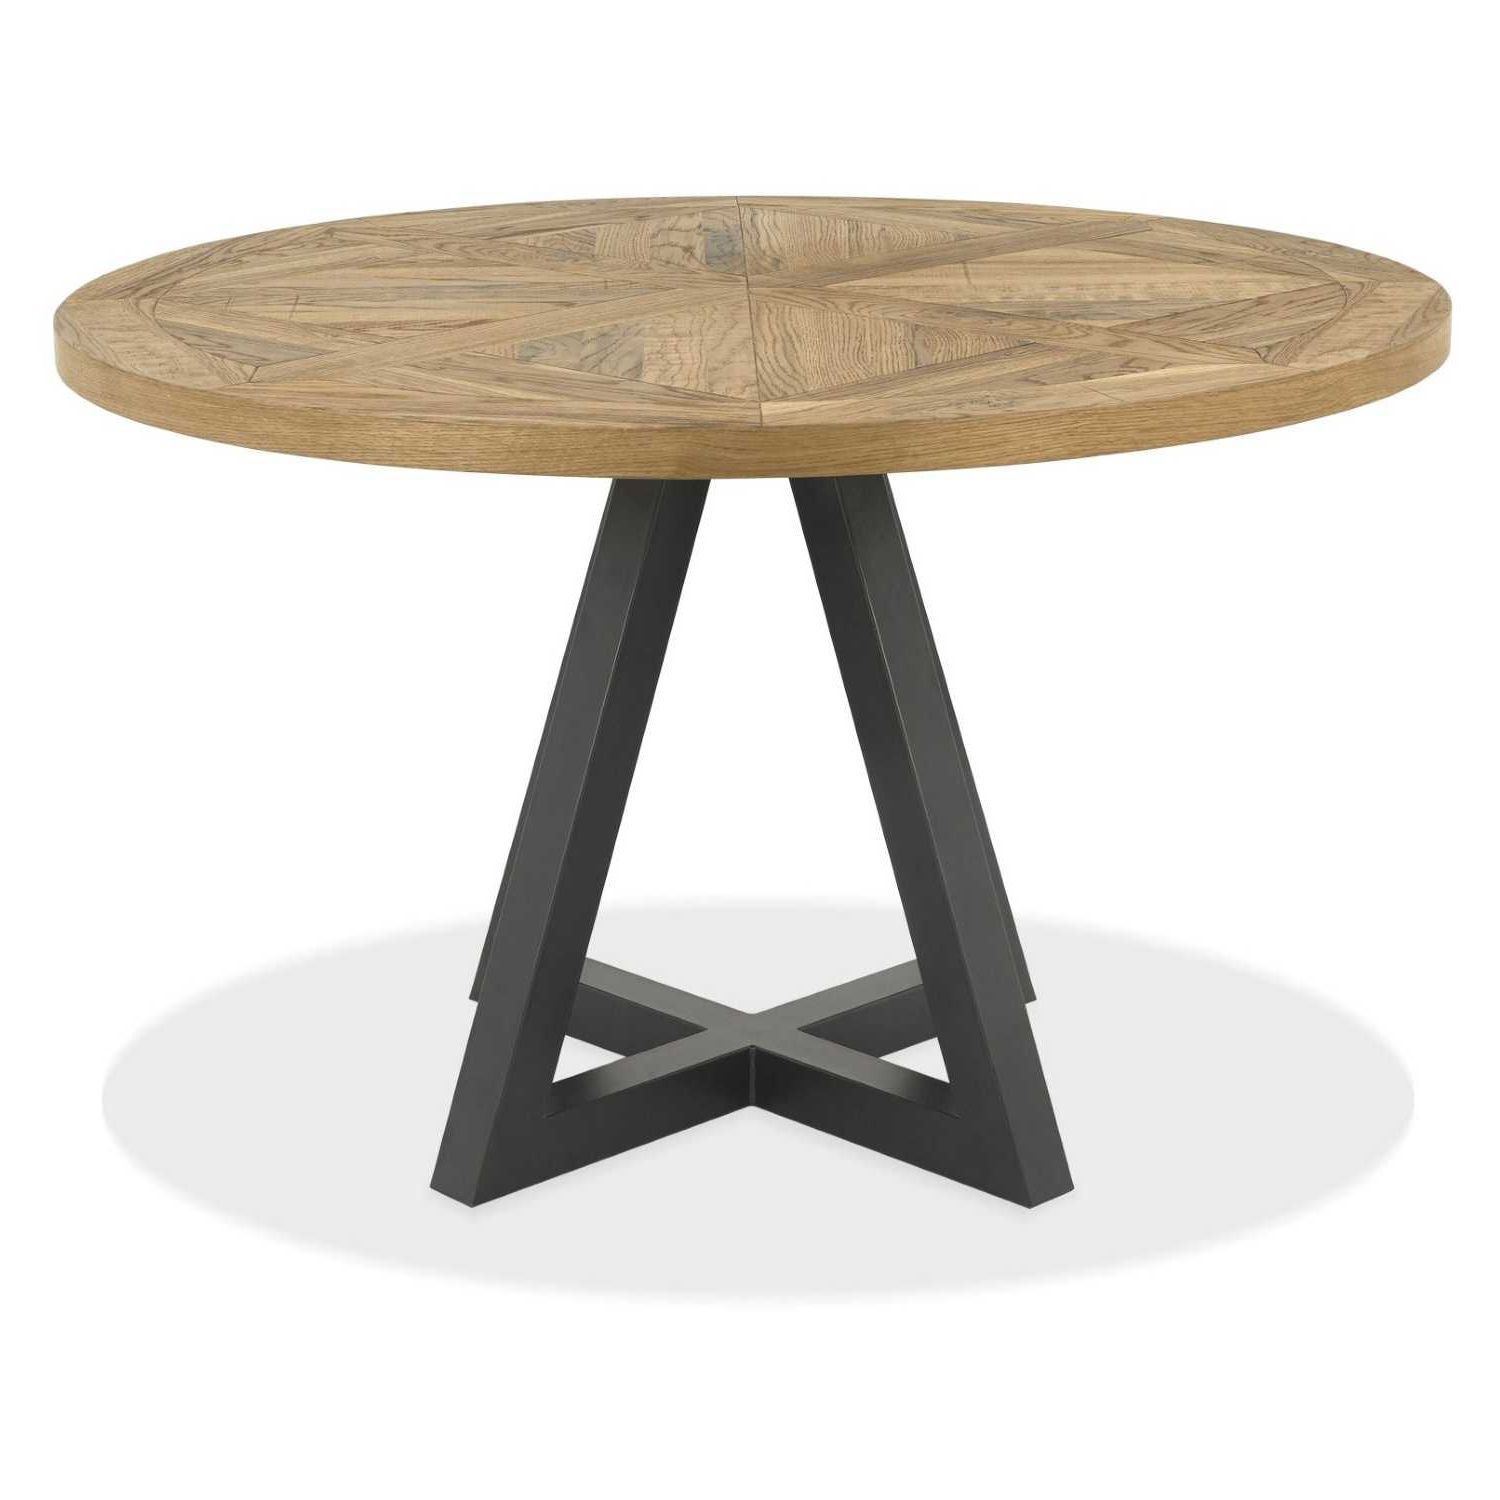 Fashionable Rustic Oak Round 4 Seater Dining Table 125cm Diameter Black Metal Base – My  Blue Apple Throughout Rustic Oak And Black Outdoor Tables (View 8 of 15)